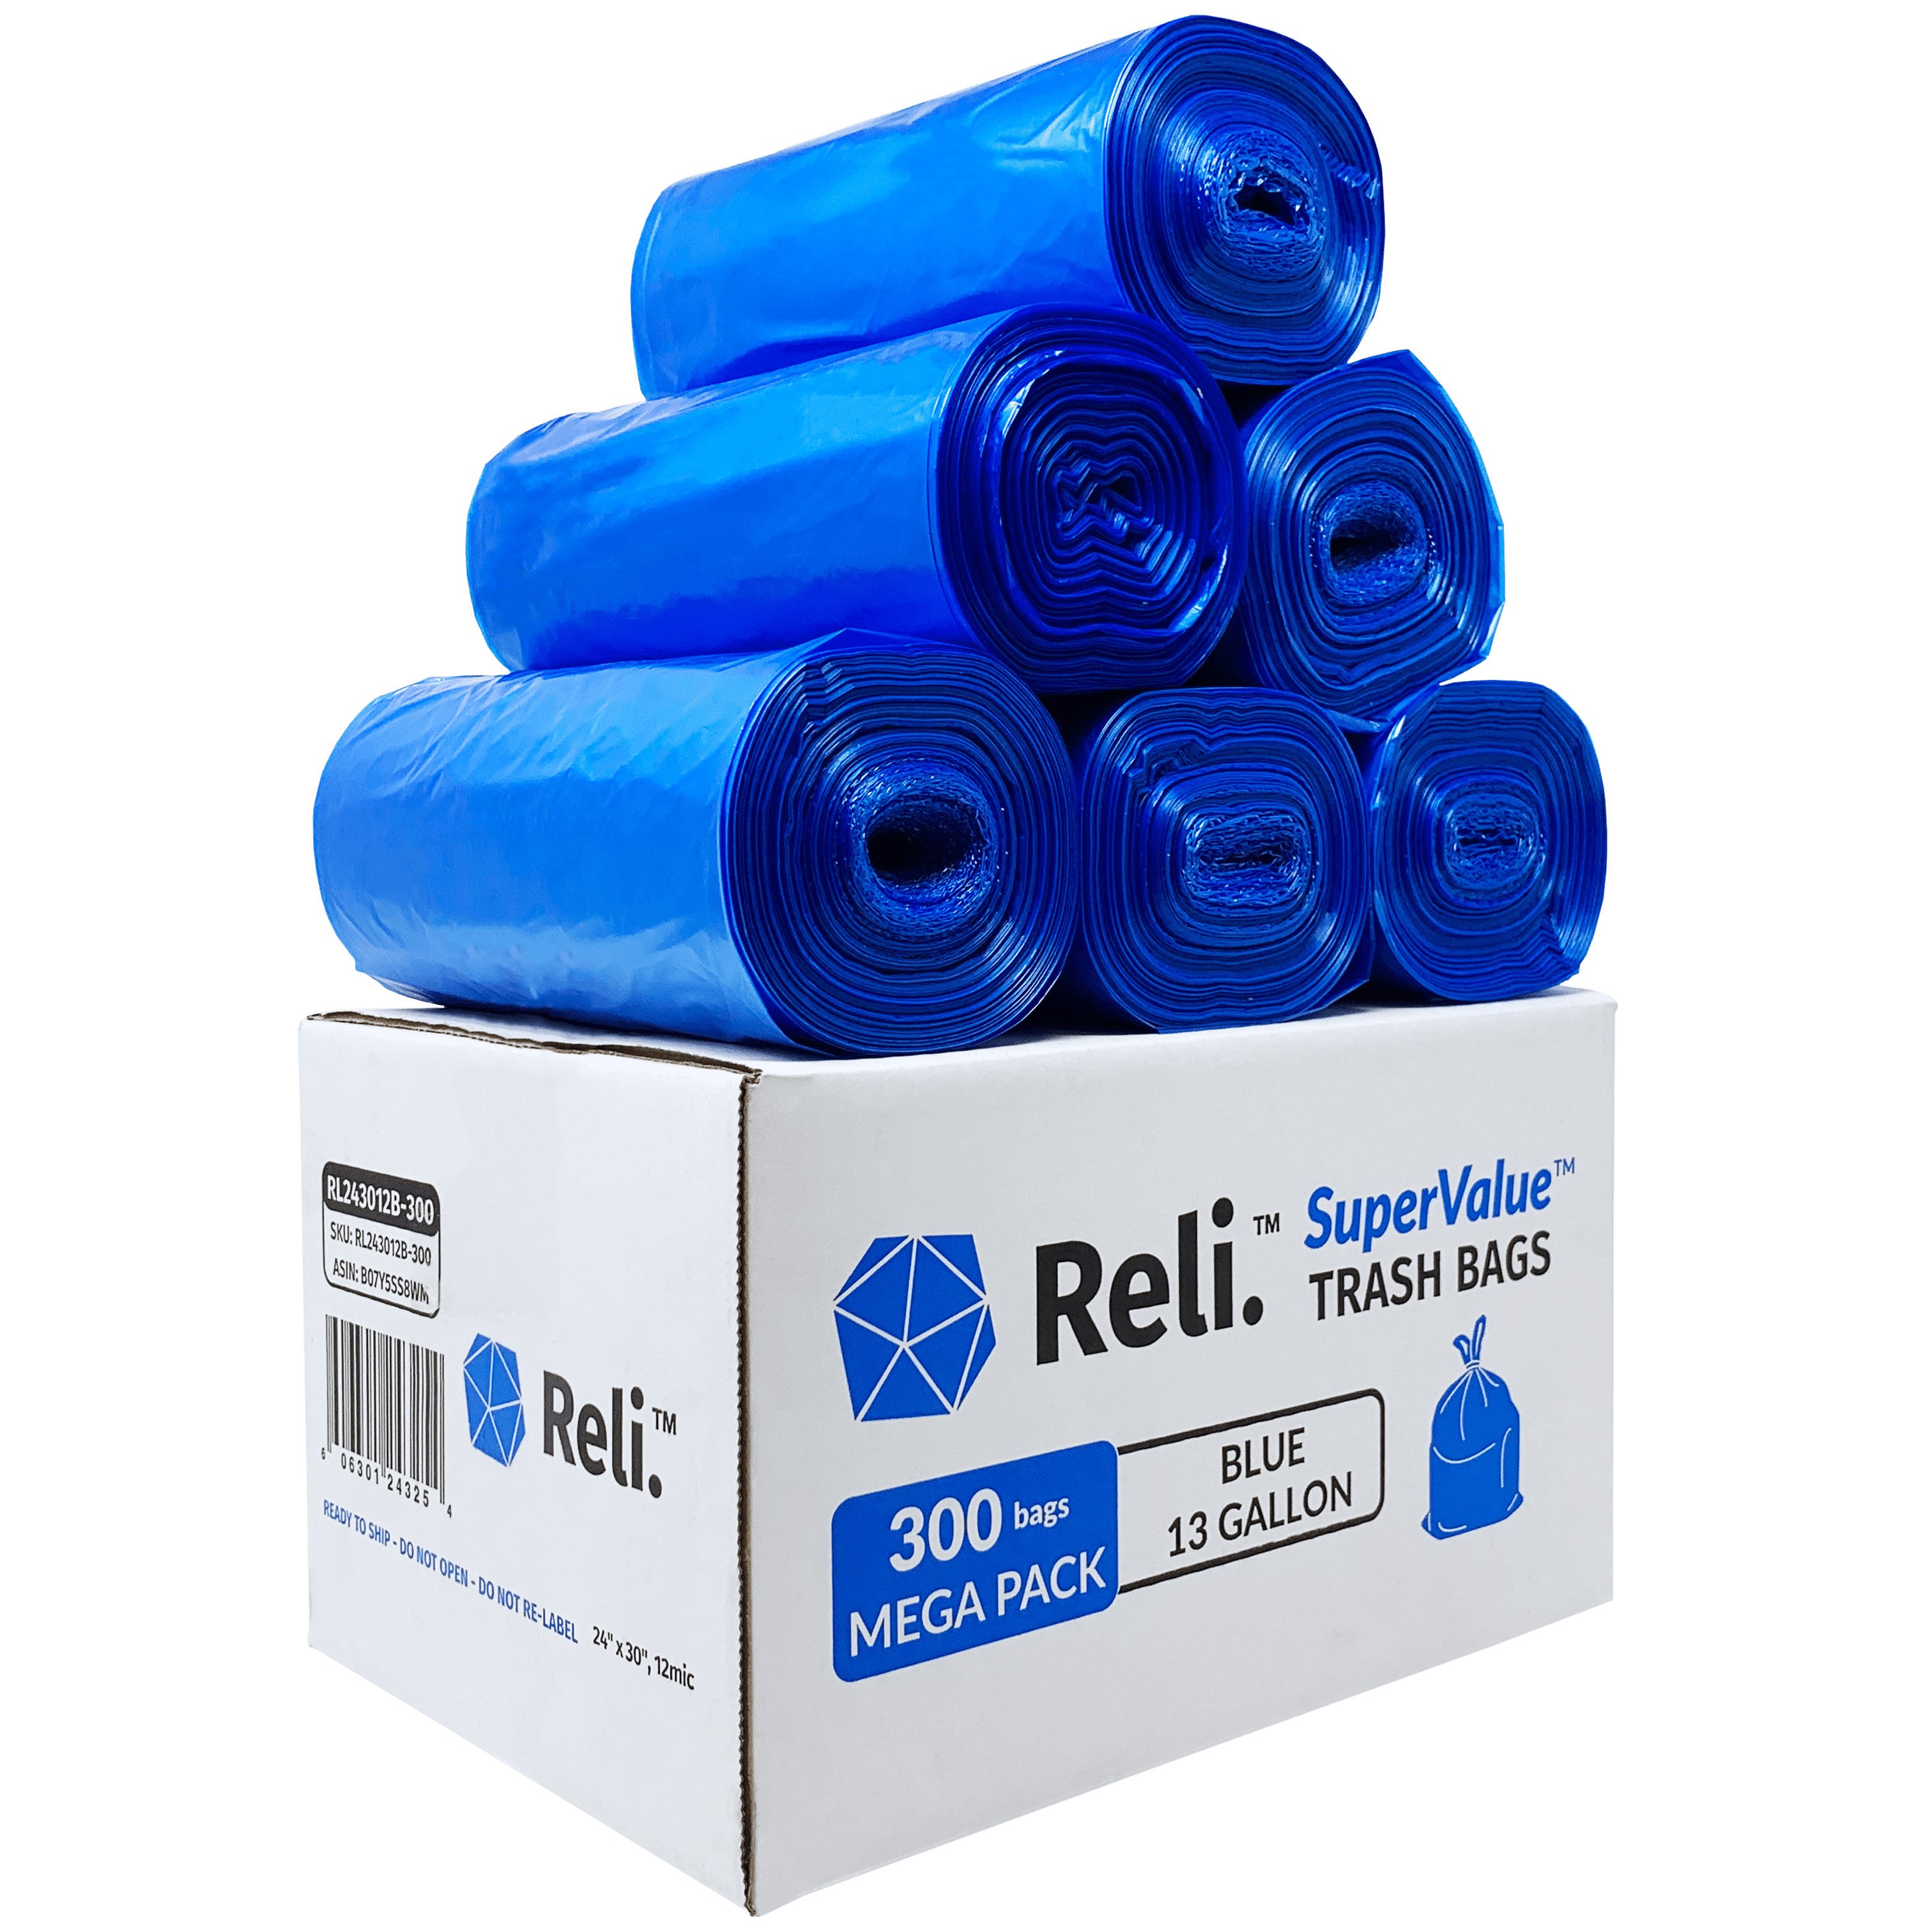 Reli. 13 Gallon Trash Bags, Tall Kitchen Recycling Blue Garbage Bags (300  Bags)